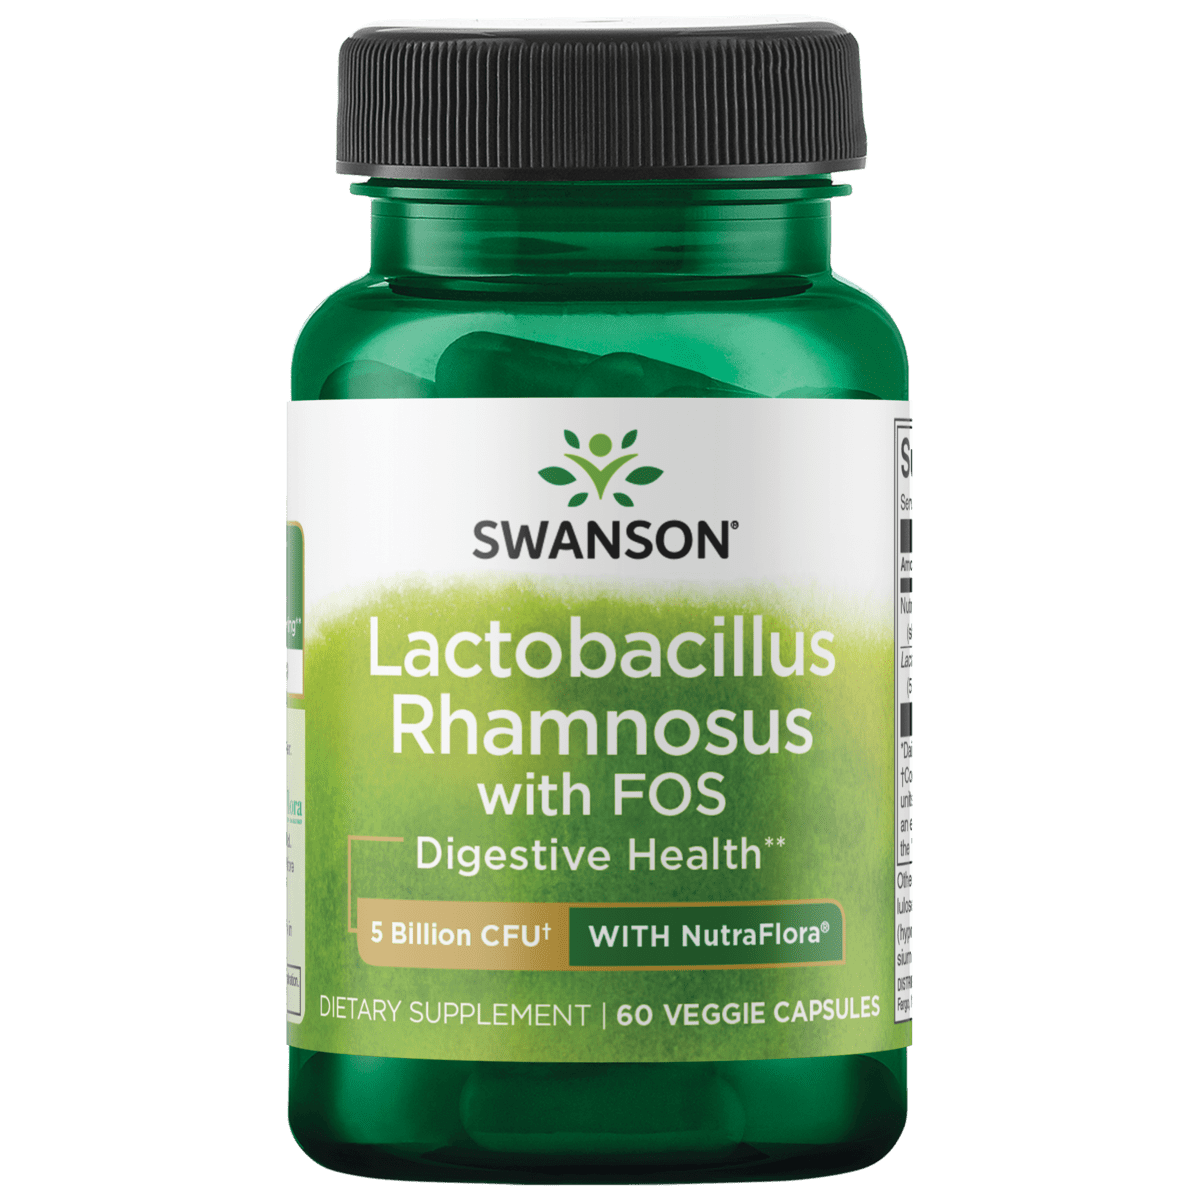 Swanson Lactobacillus Rhamnosus with FOS - Probiotic Supplement Supporting  Digestive Health with 5 Billion CFU - Promotes GI Tract Health During